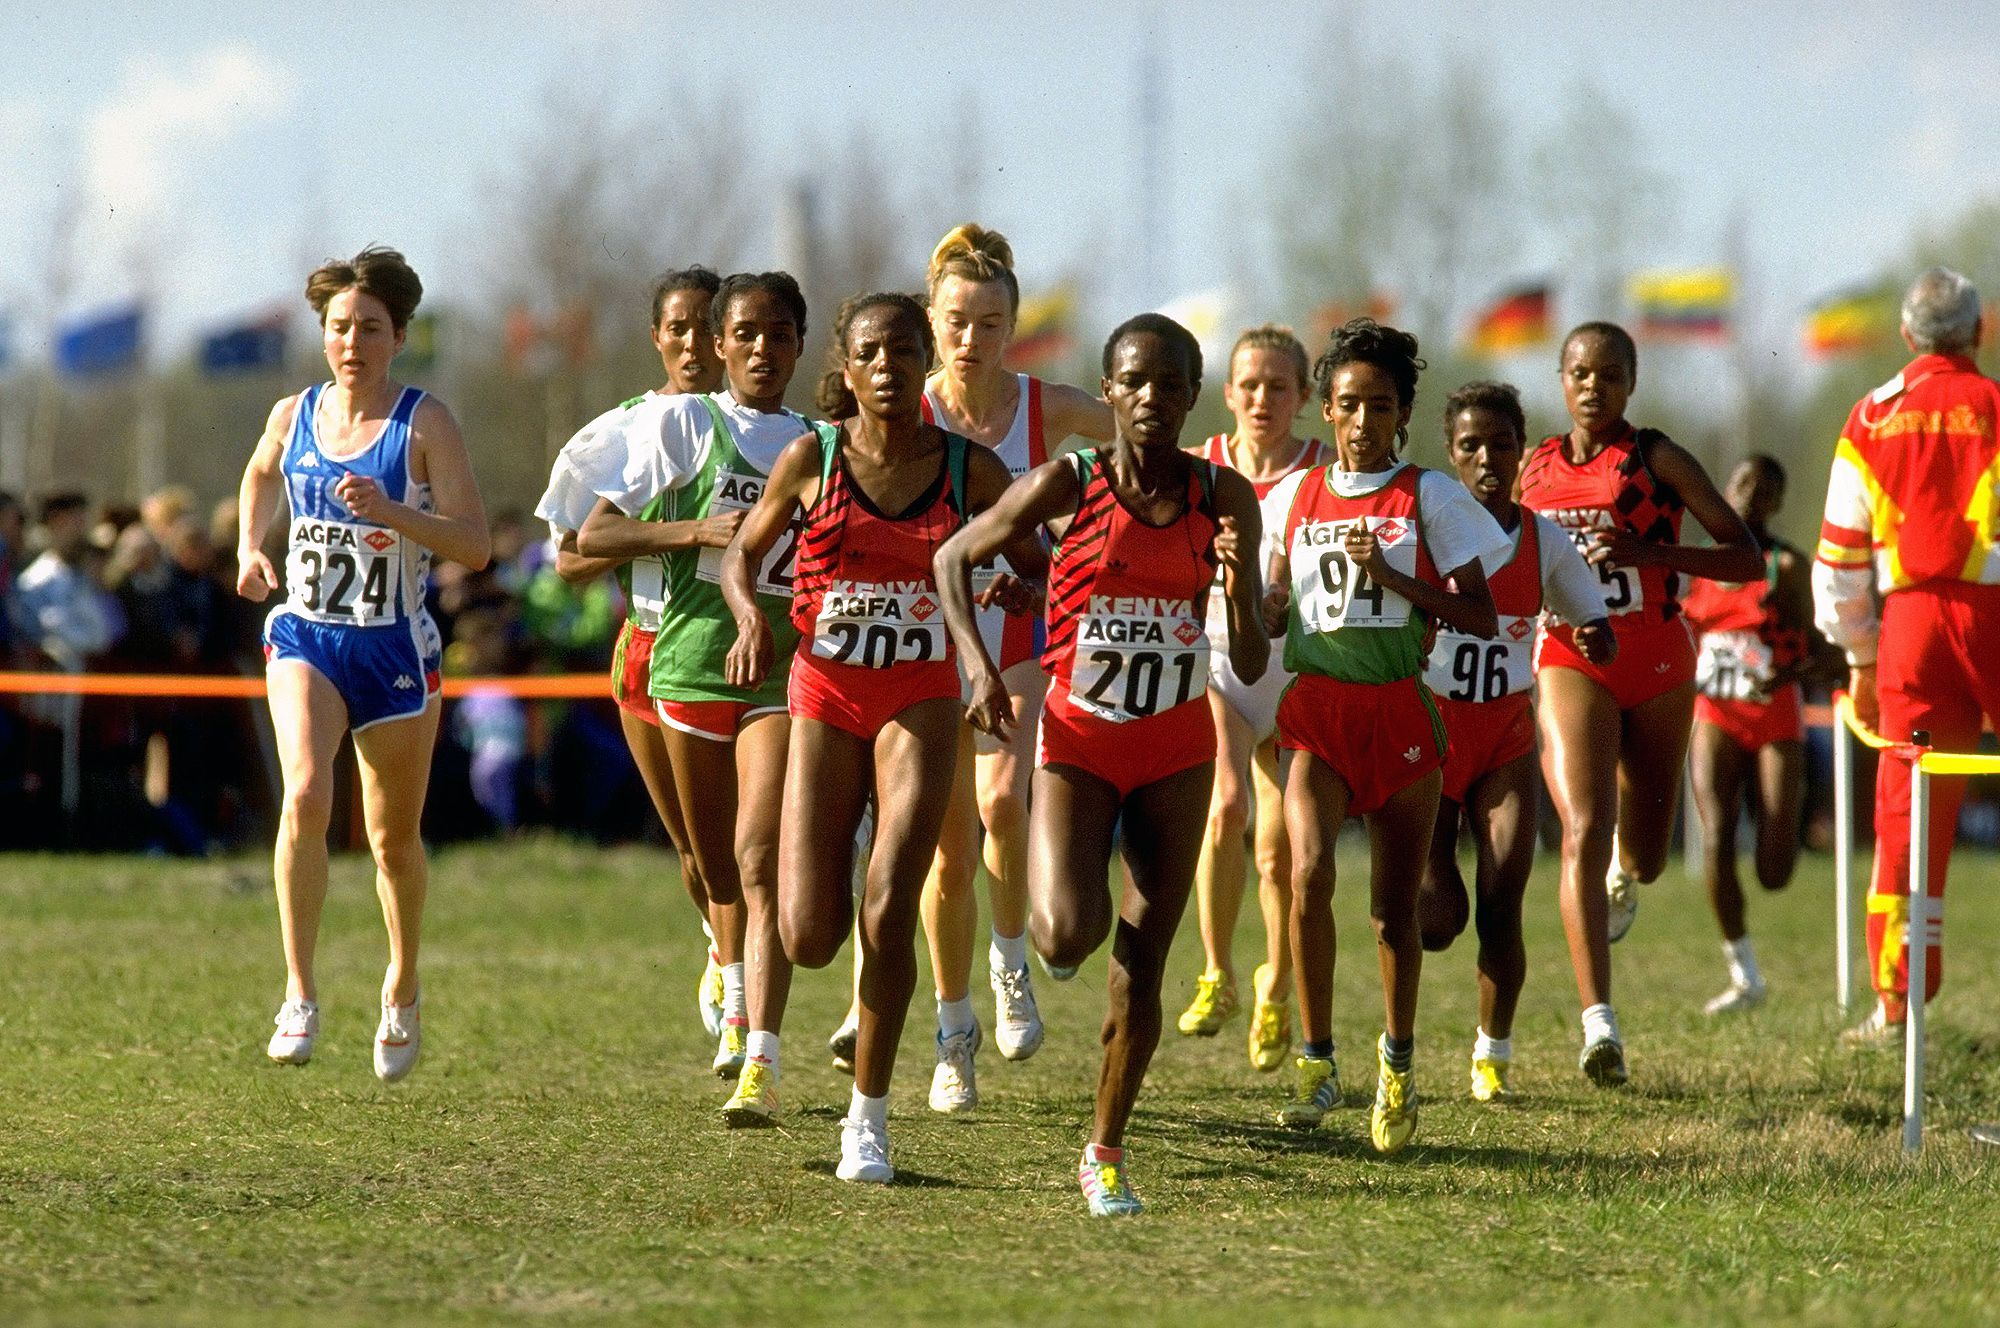 Susan Sirma leads the senior women's race at the 1991 World Cross with Derartu Tulu tucked behind